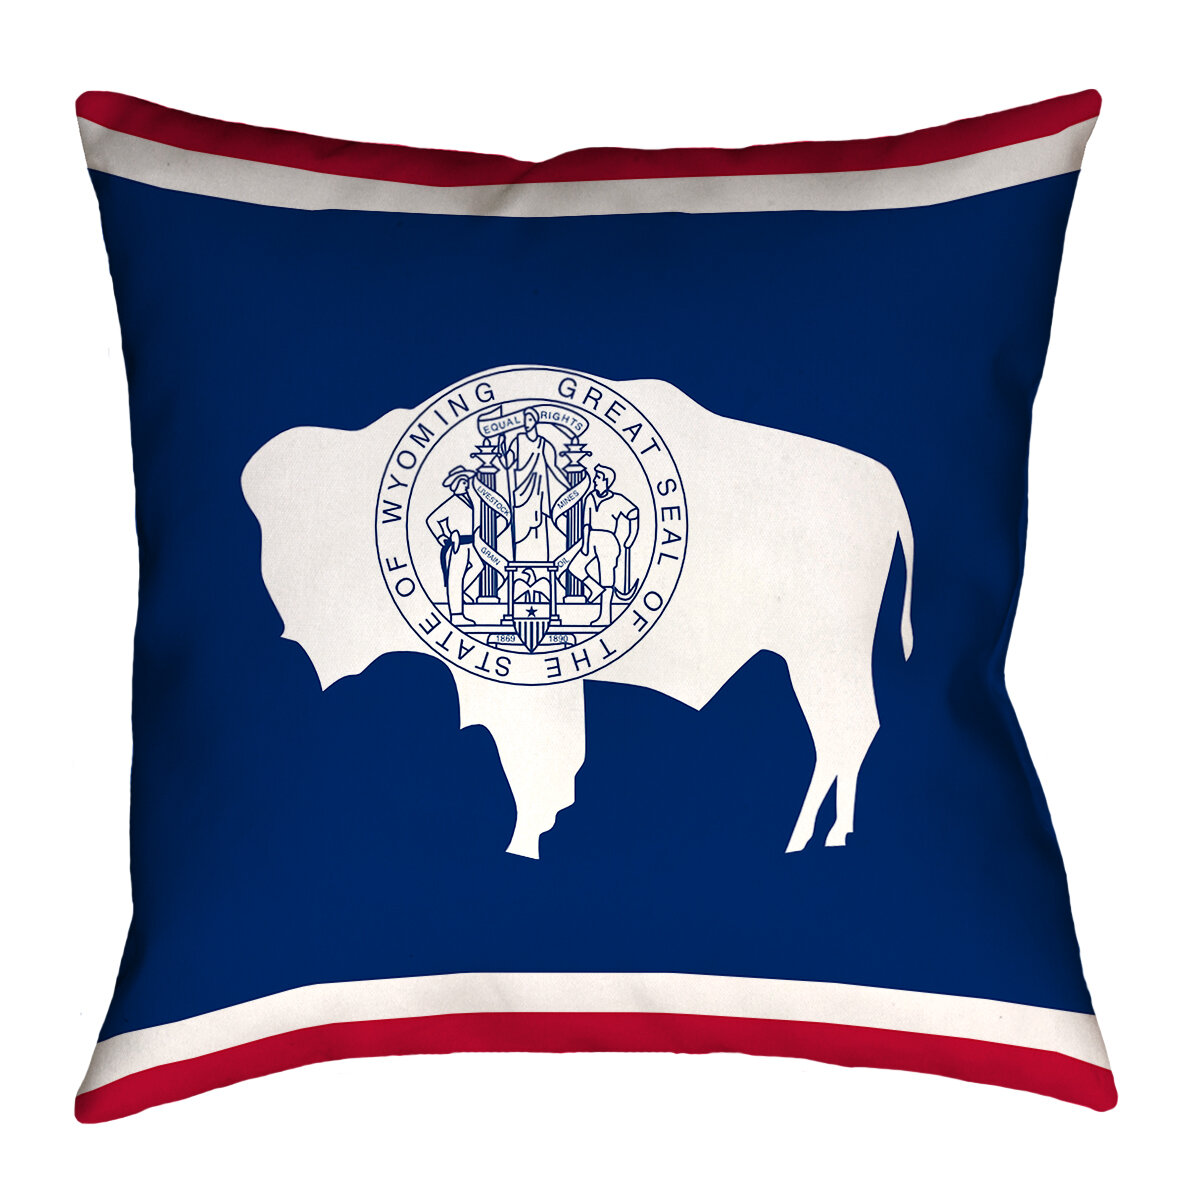 ArtVerse Katelyn Smith 14 x 14 Poly Twill Double Sided Print with Concealed Zipper & Insert Wyoming Canvas Pillow 